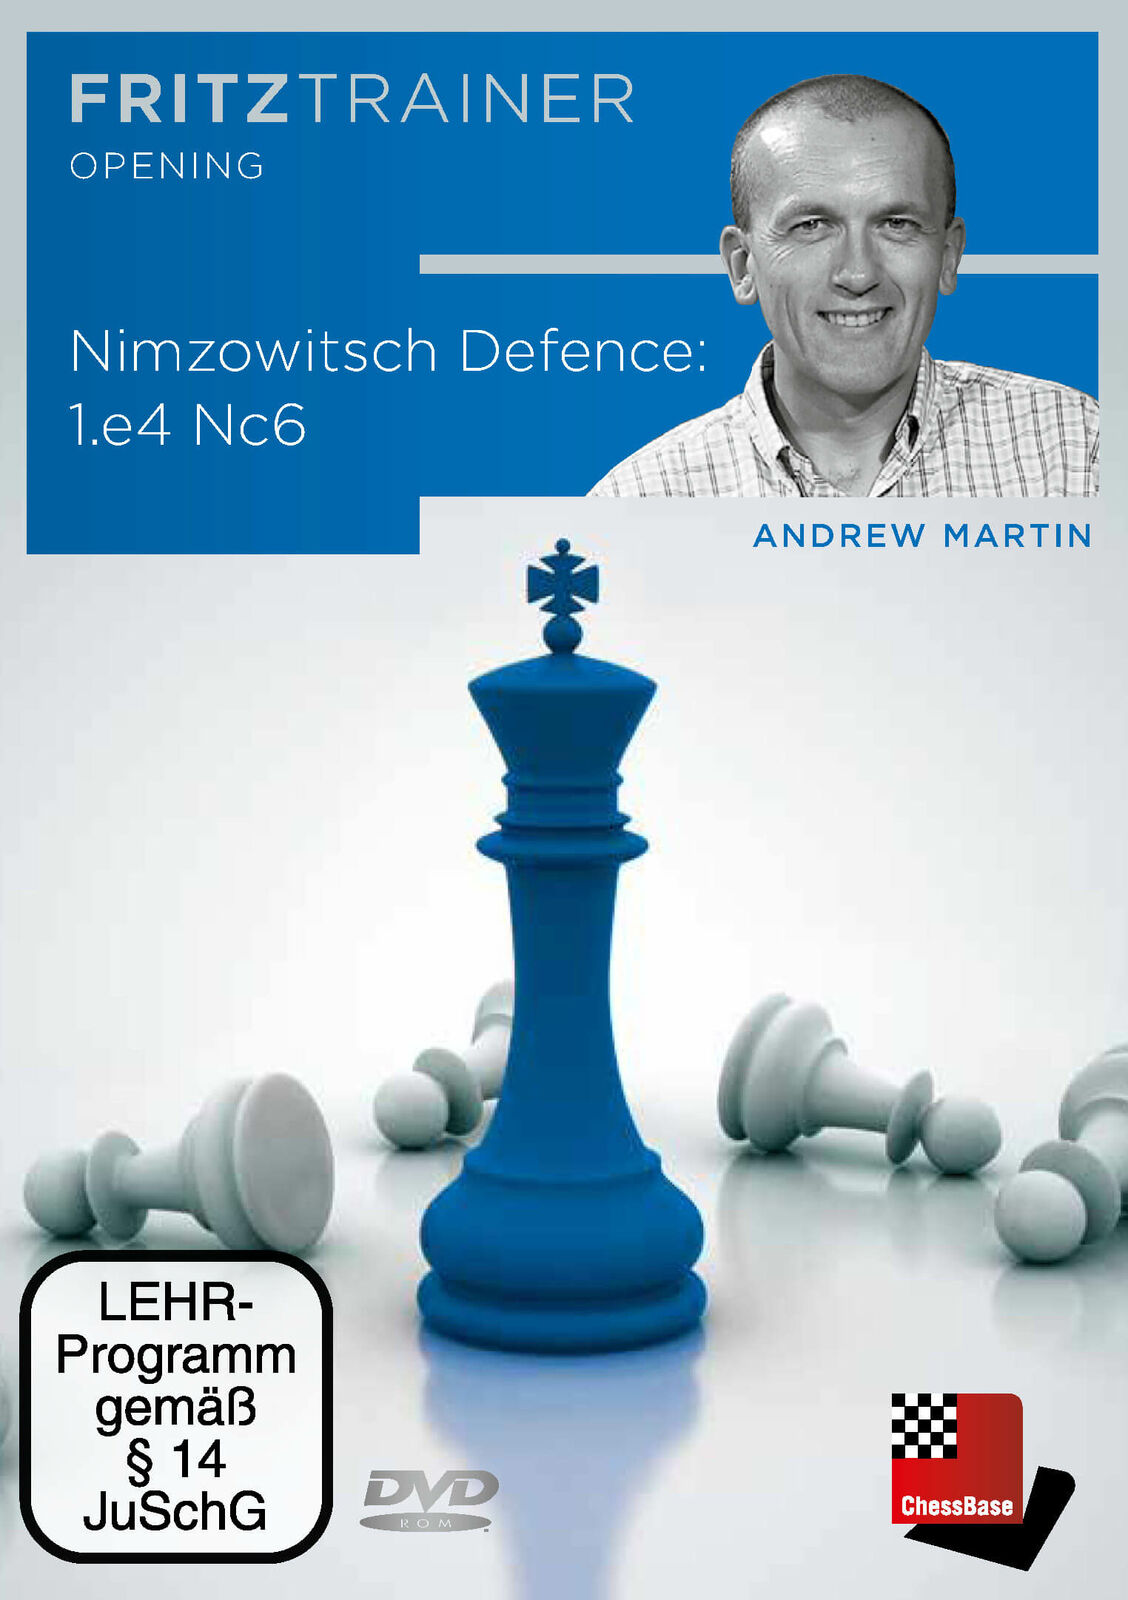 Nimzowitsch Defence - 1. e4 Nc6 - Andrew Martin